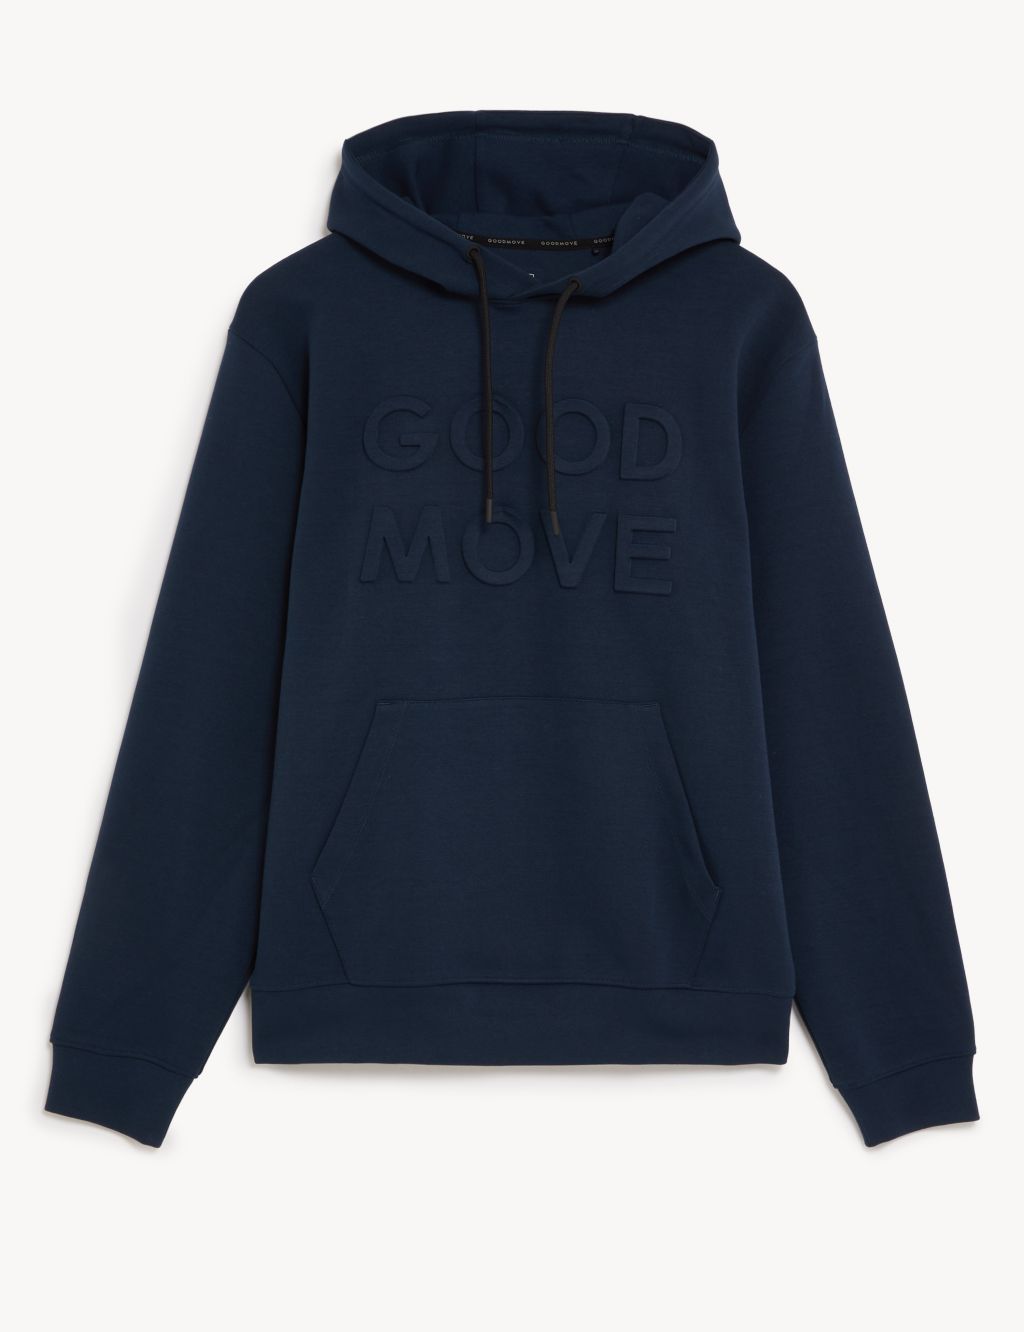 Cotton Rich Graphic Hoodie image 2